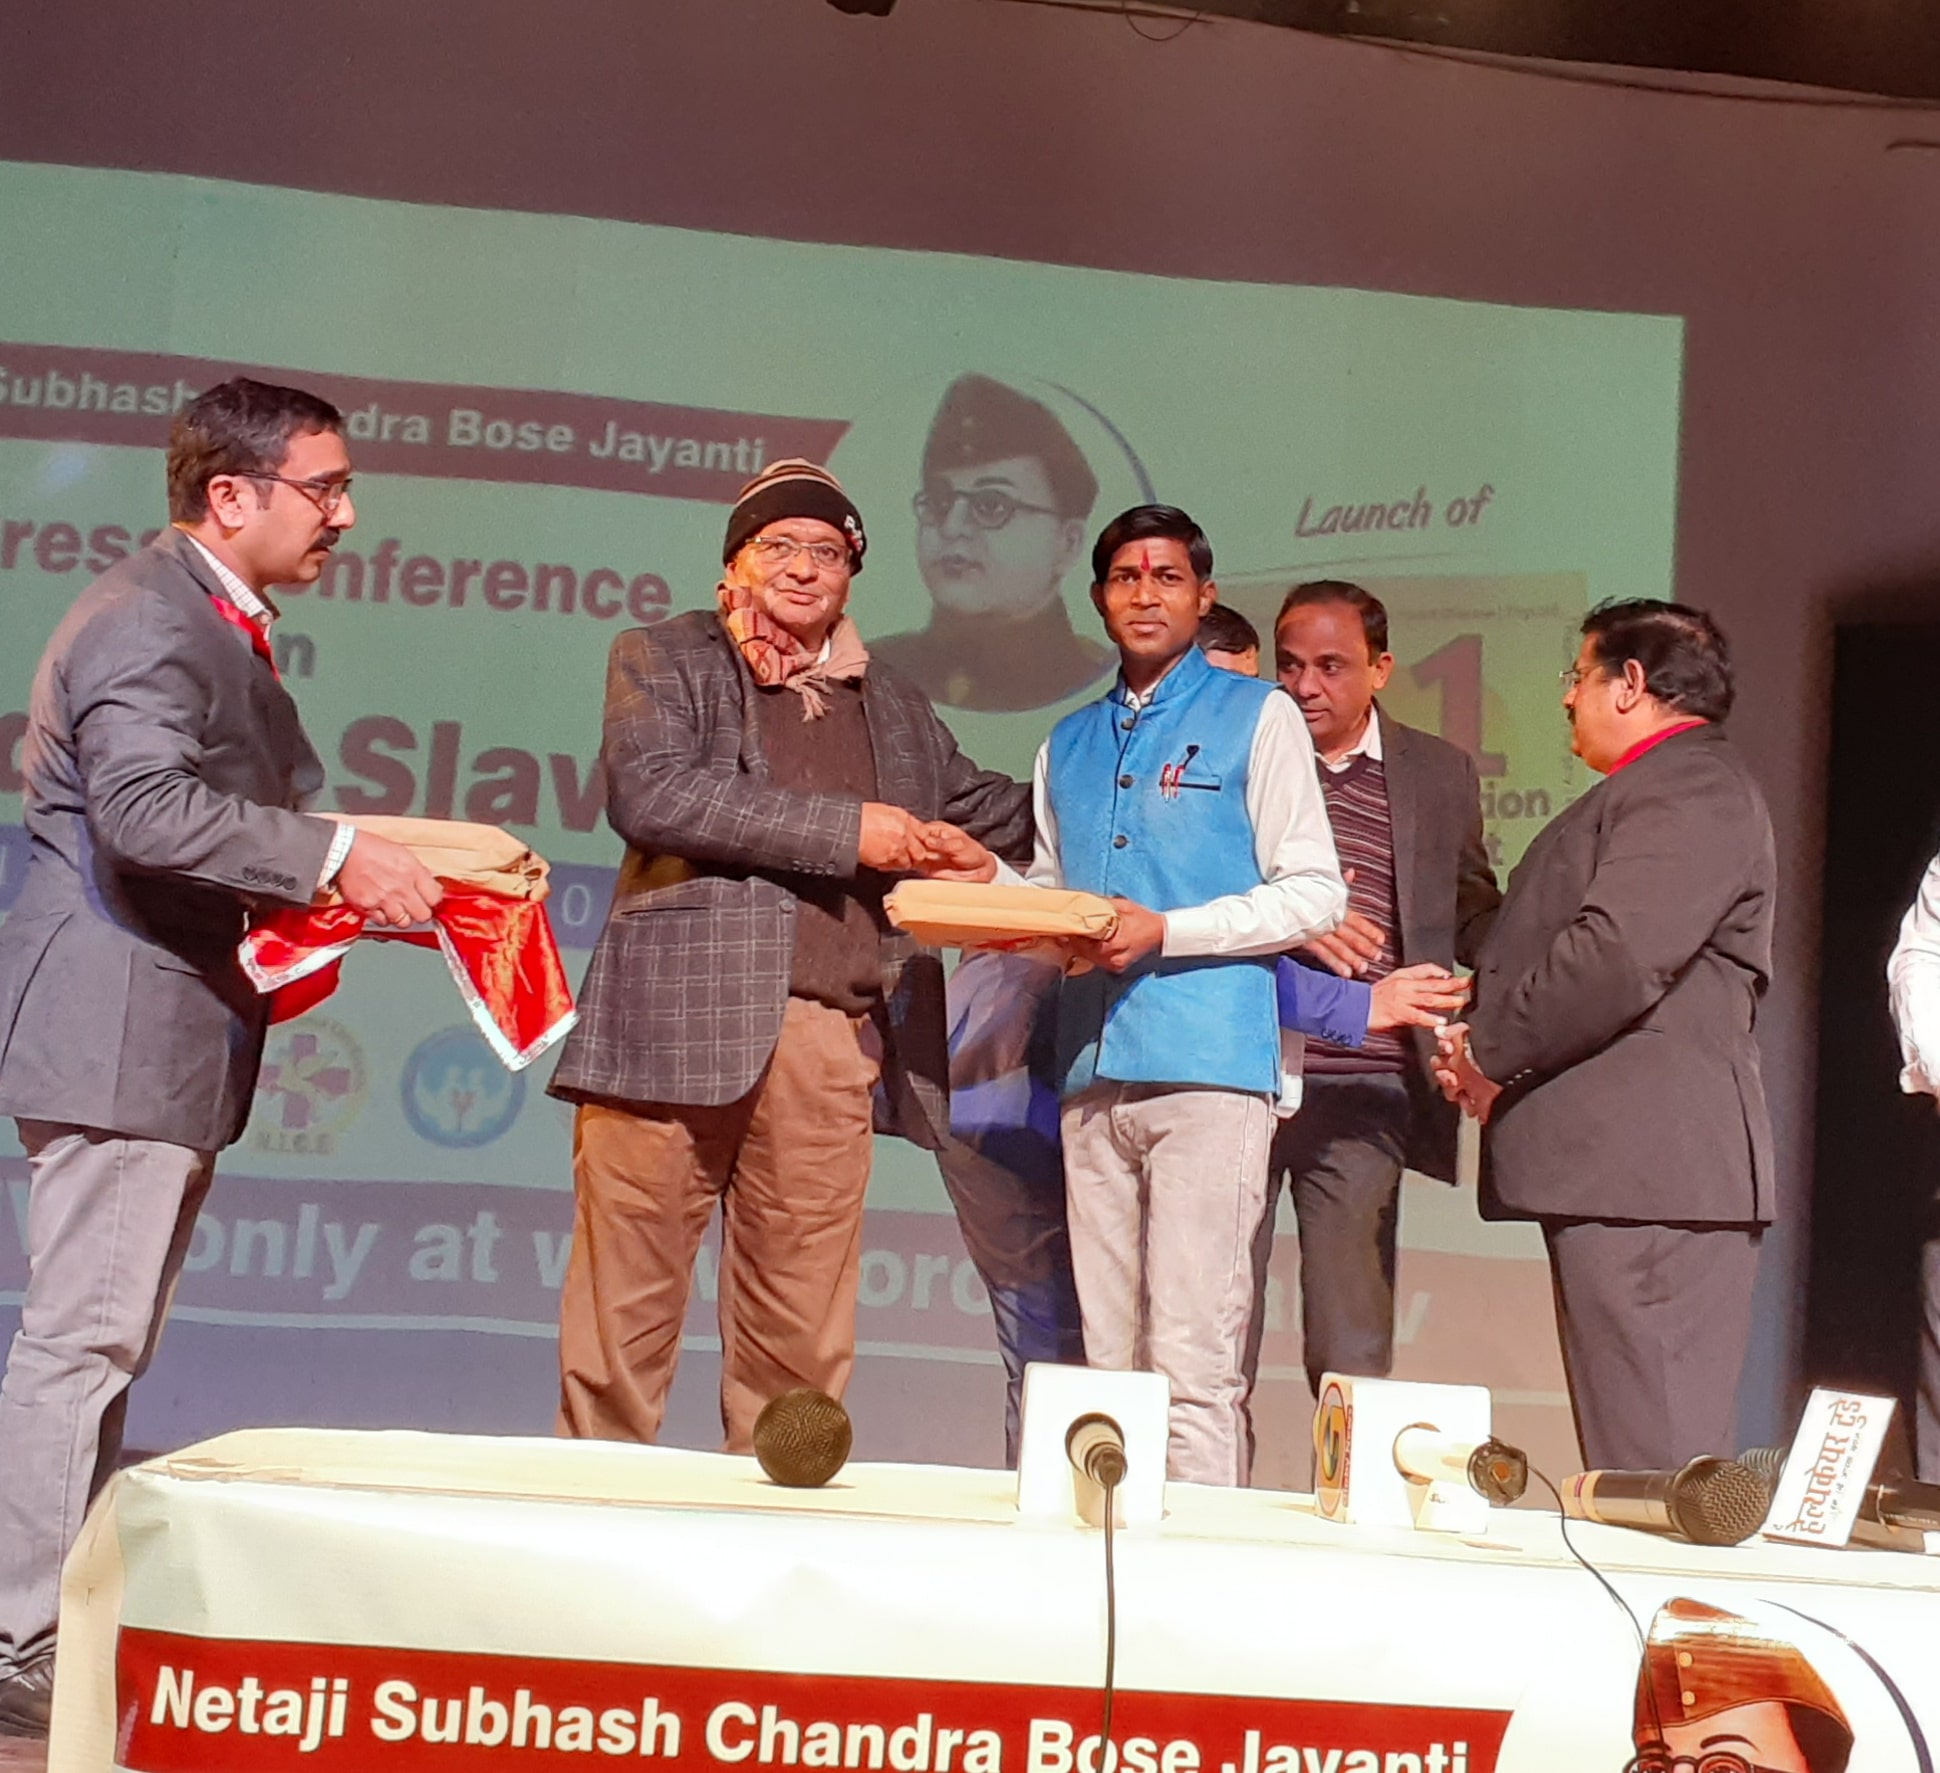 Sumit Azad Prize for Good Journalism